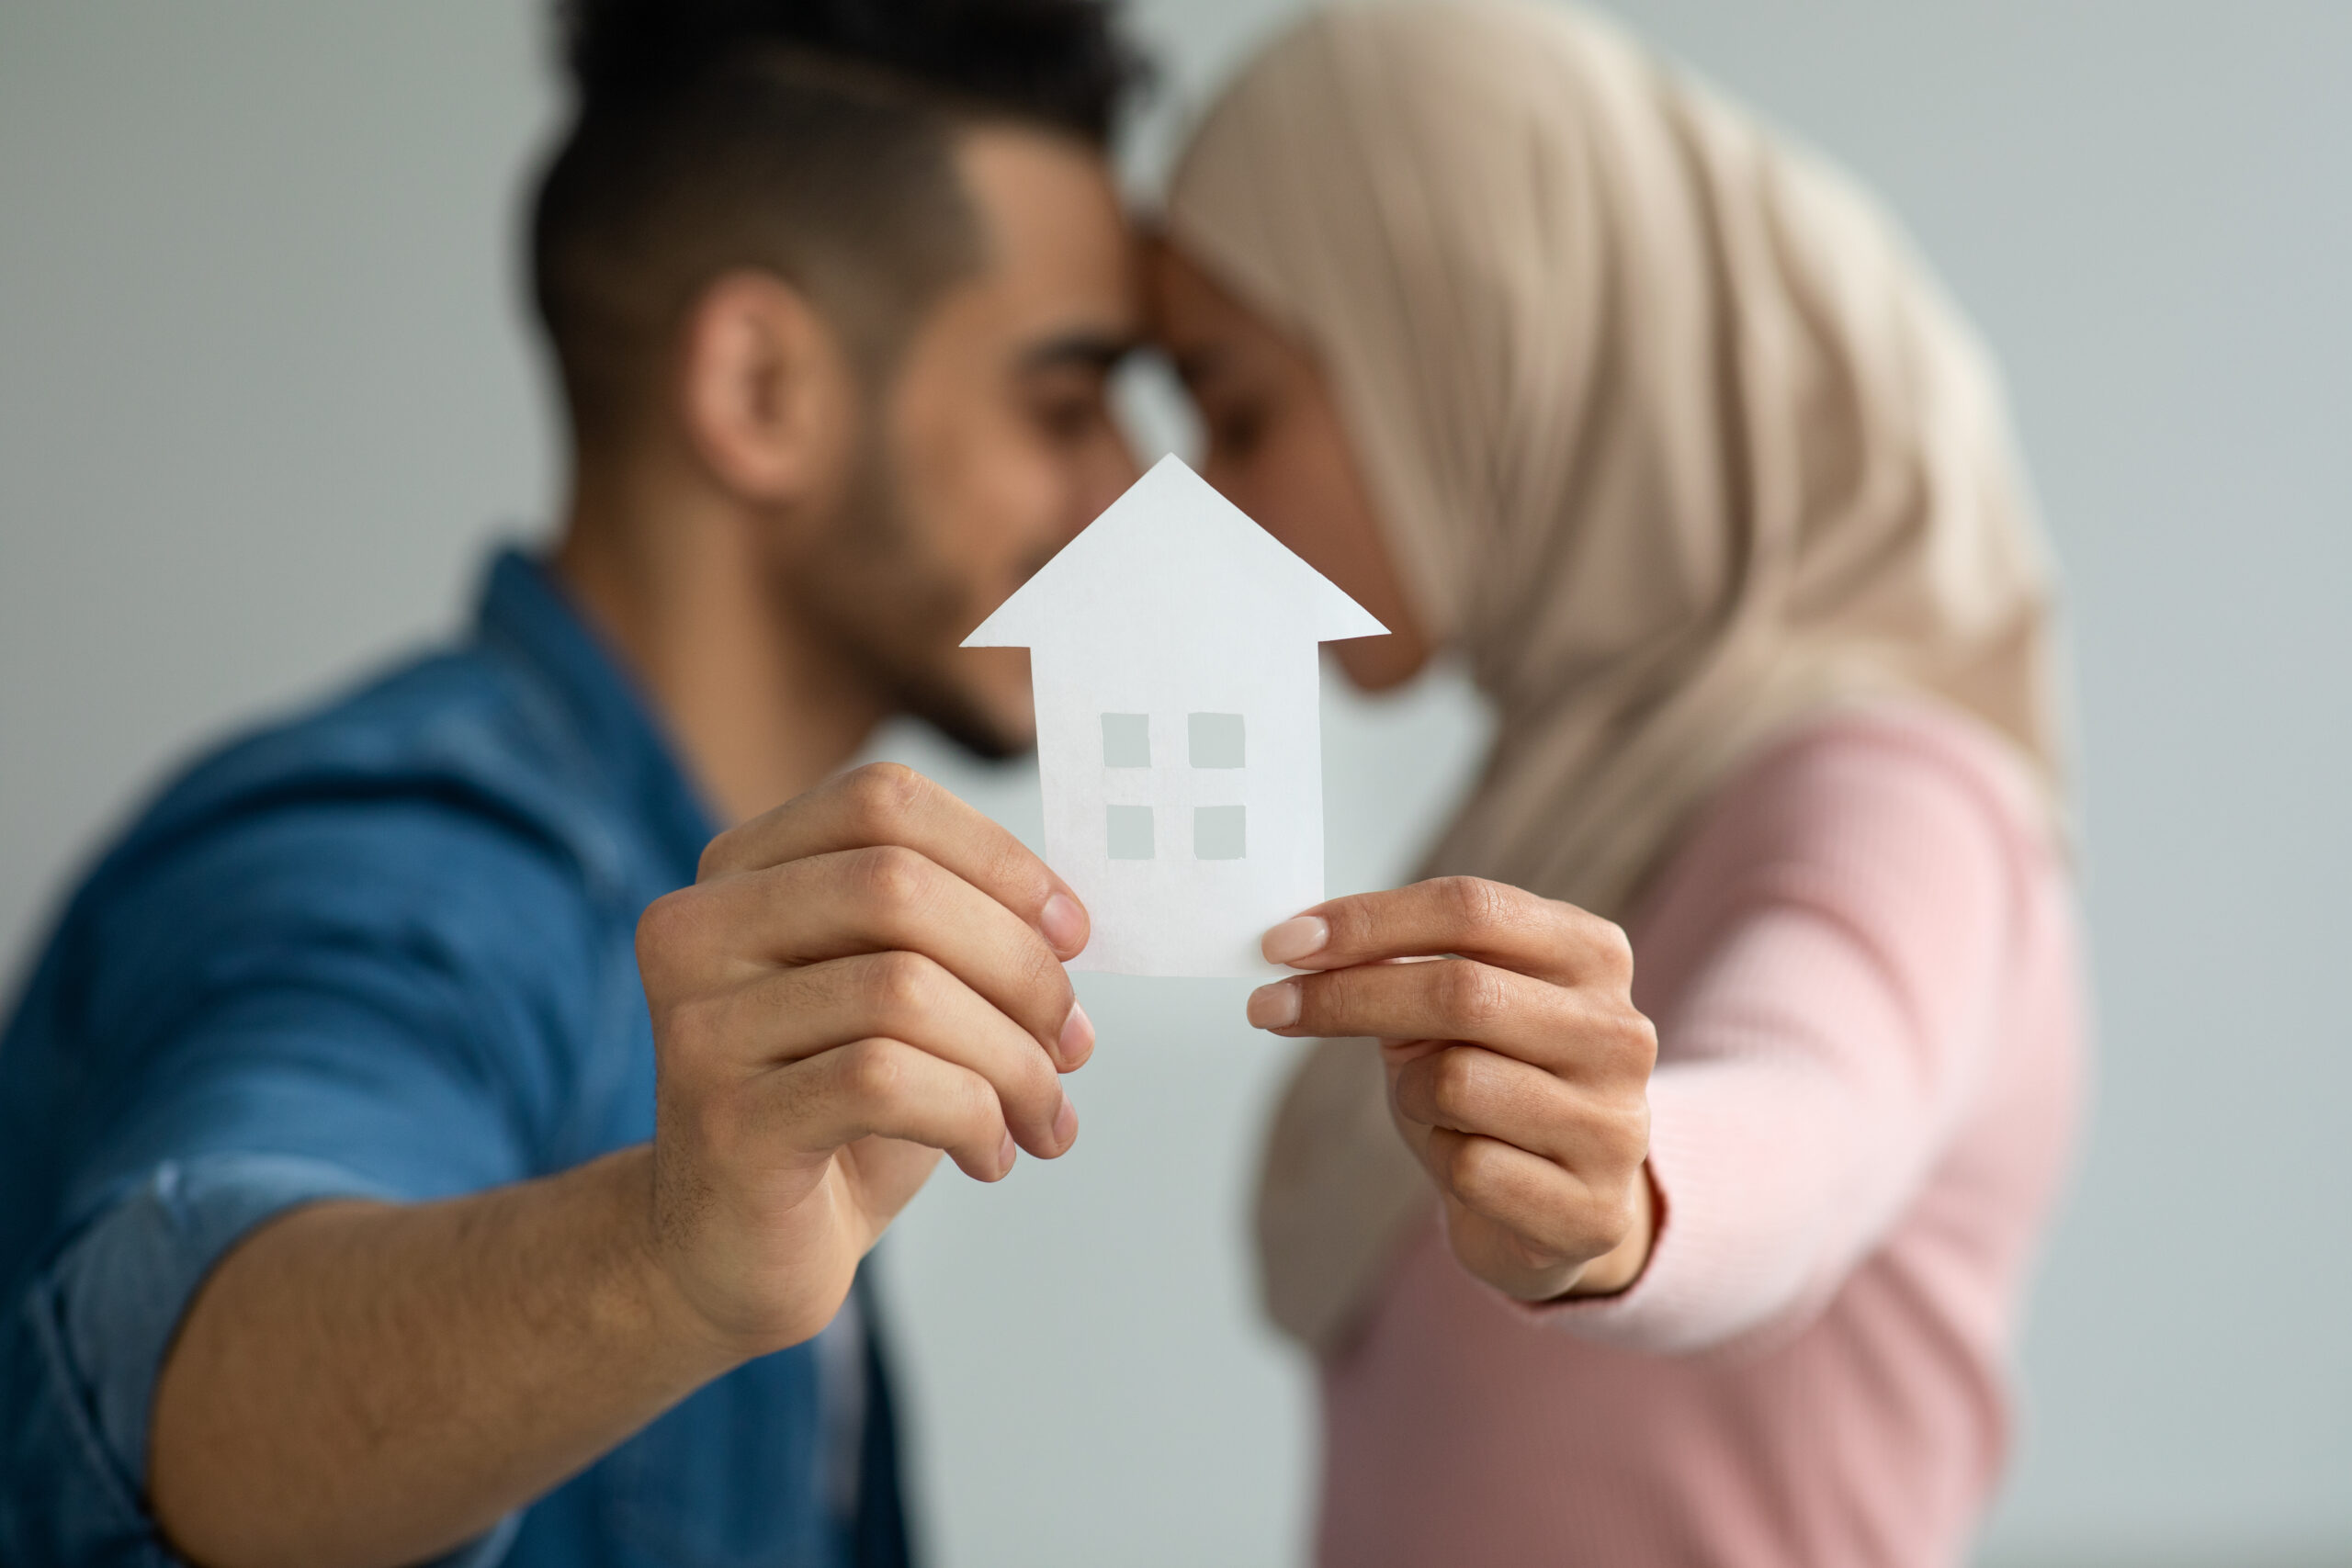 Are You Ready To Fall in Love with Homeownership?